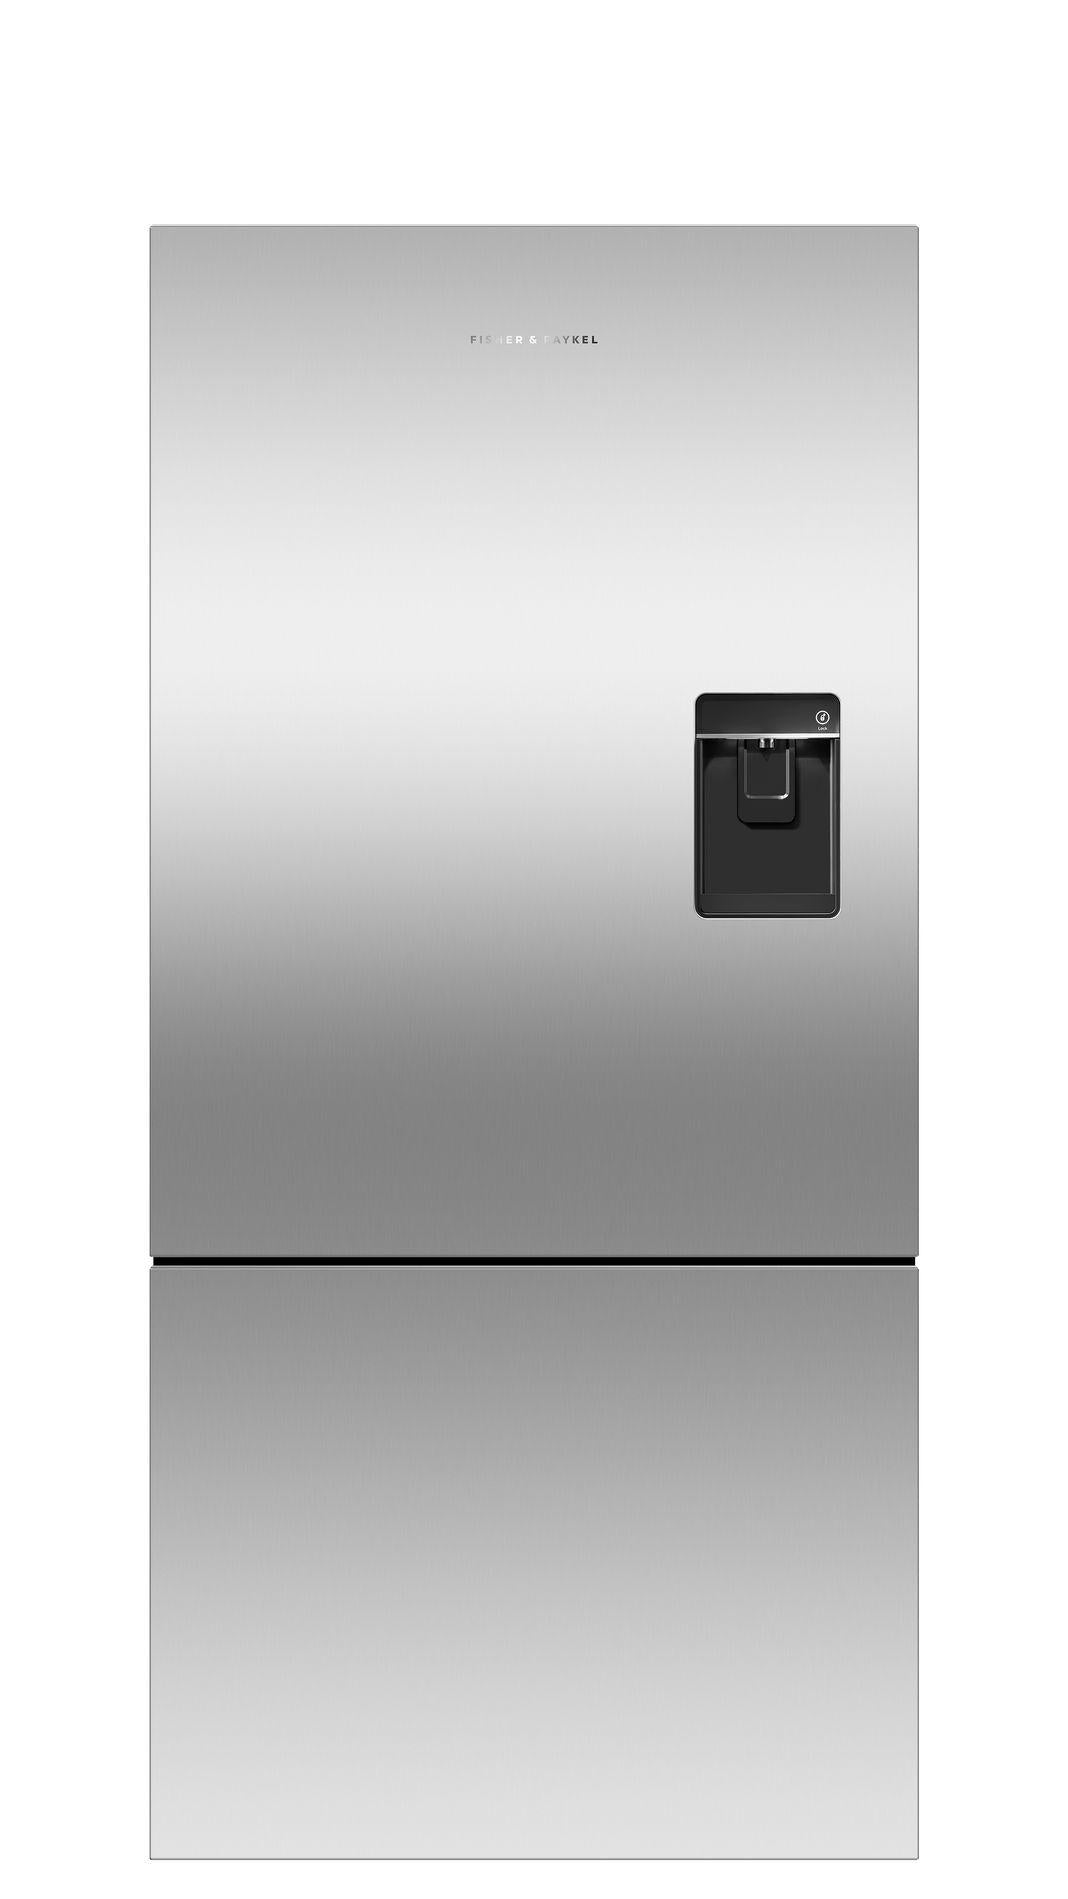 Fisher Paykel - 31.125 Inch 17.5 cu. ft Bottom Mount Refrigerator in Stainless - RF170BRPUX6 N